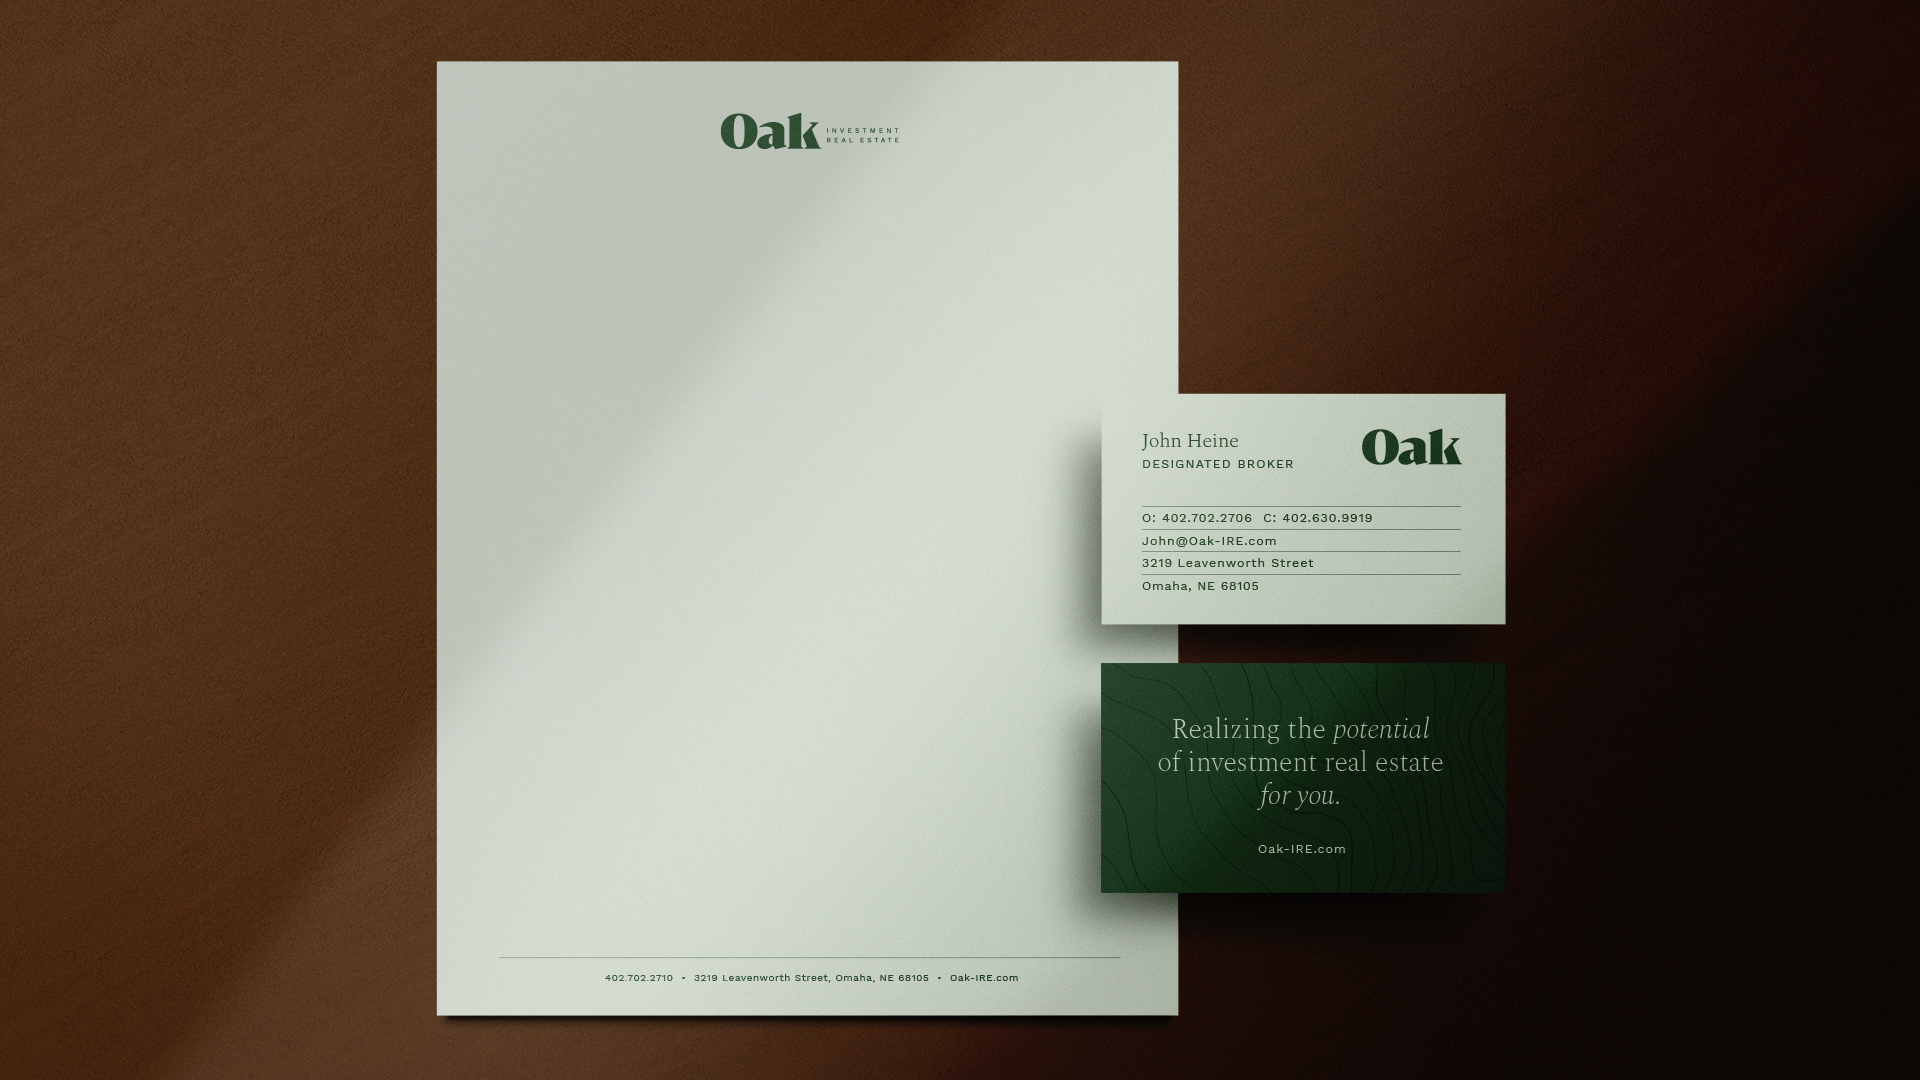 Oak Investment Real Estate Branding: Stationery Layouts